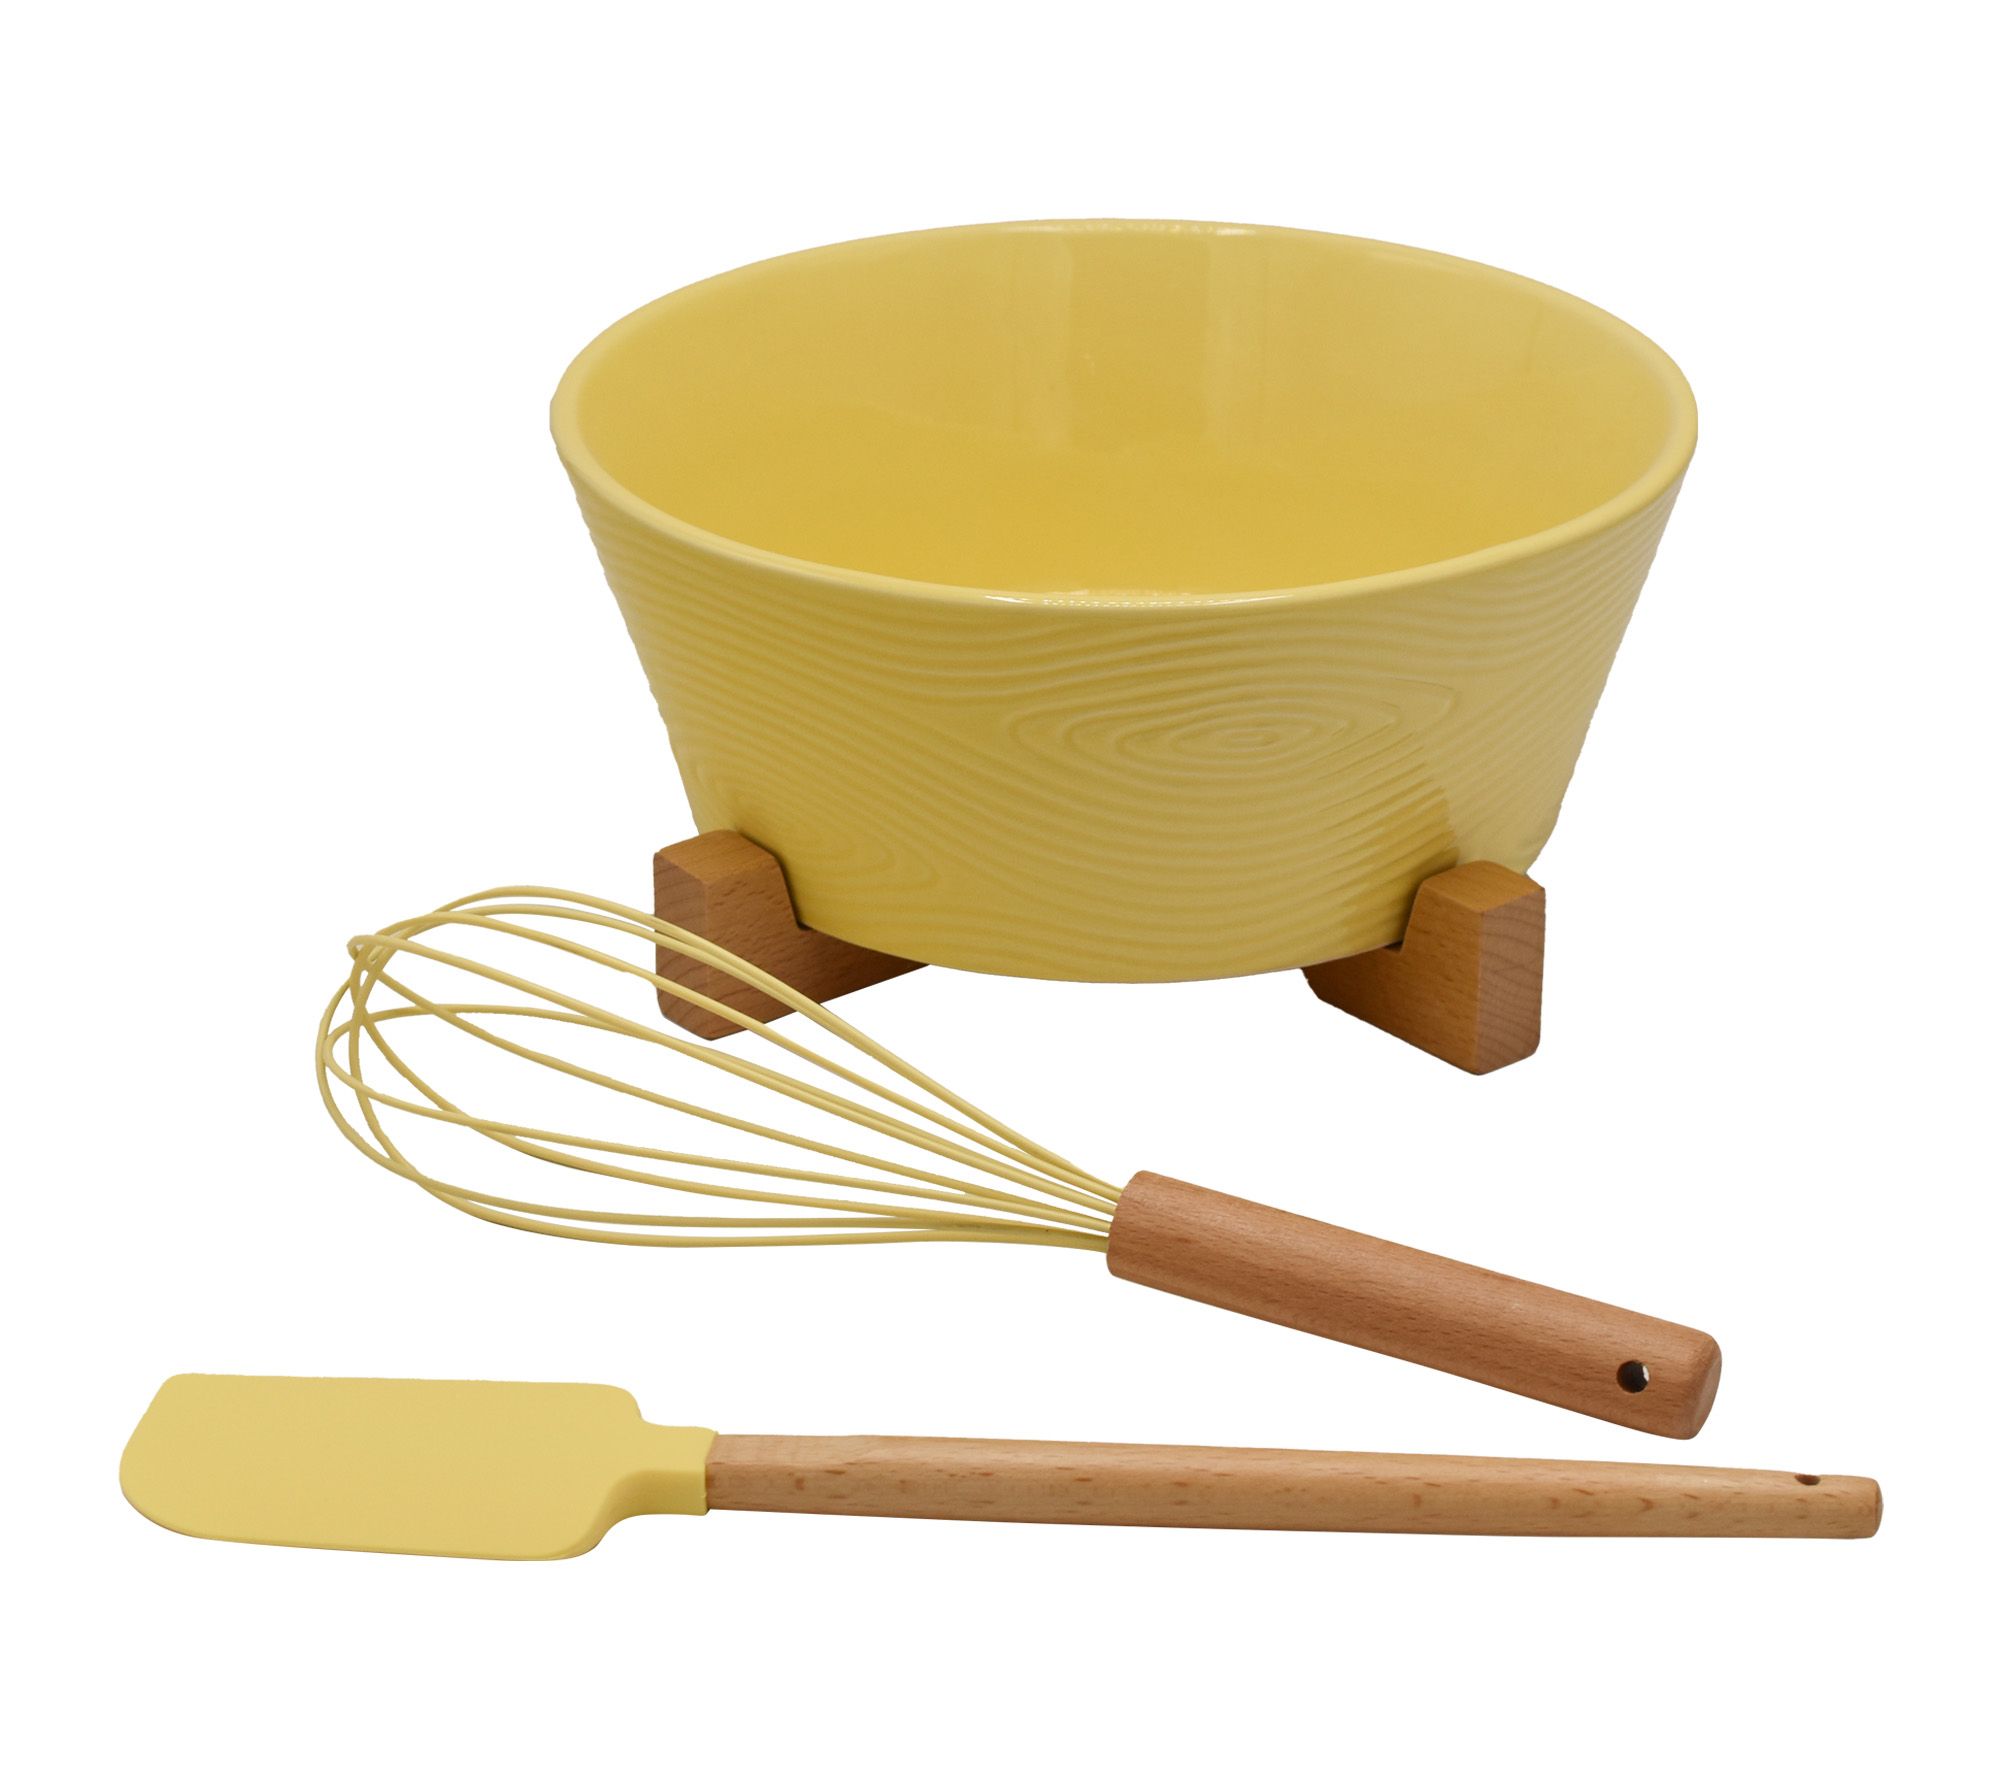 Mixing Bowls for Kitchen - Plastic Mixing Bowls with Handles 2.5 qt - Ideal for Mixing Up Cakes, Mixing Sauces and Dips, for Food Prep & More - Set of